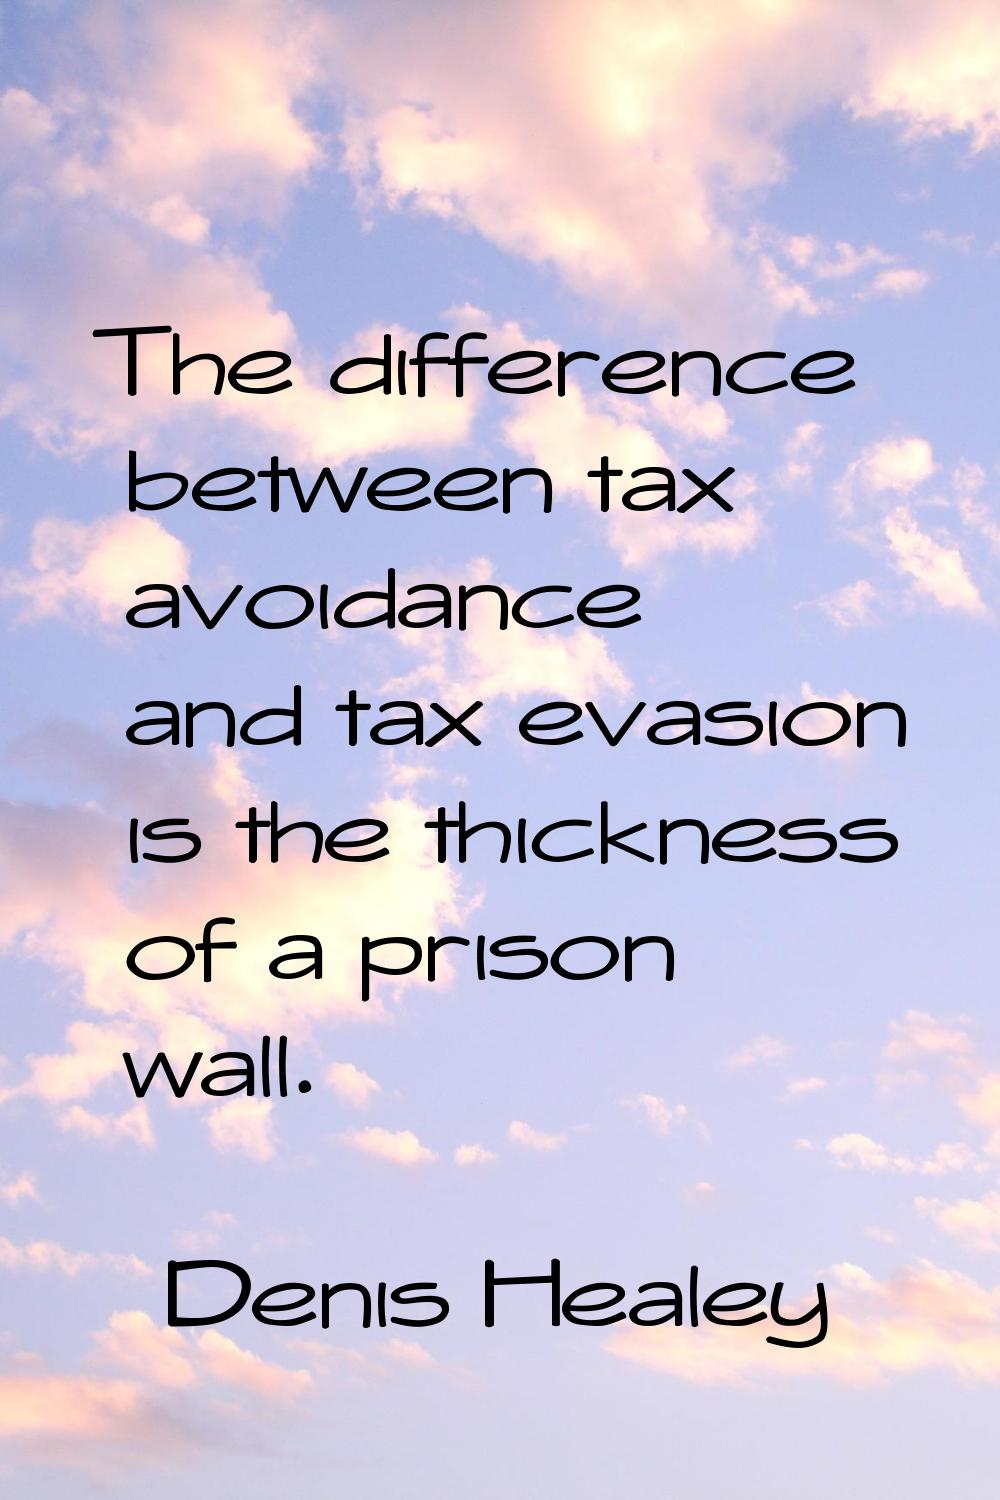 The difference between tax avoidance and tax evasion is the thickness of a prison wall.